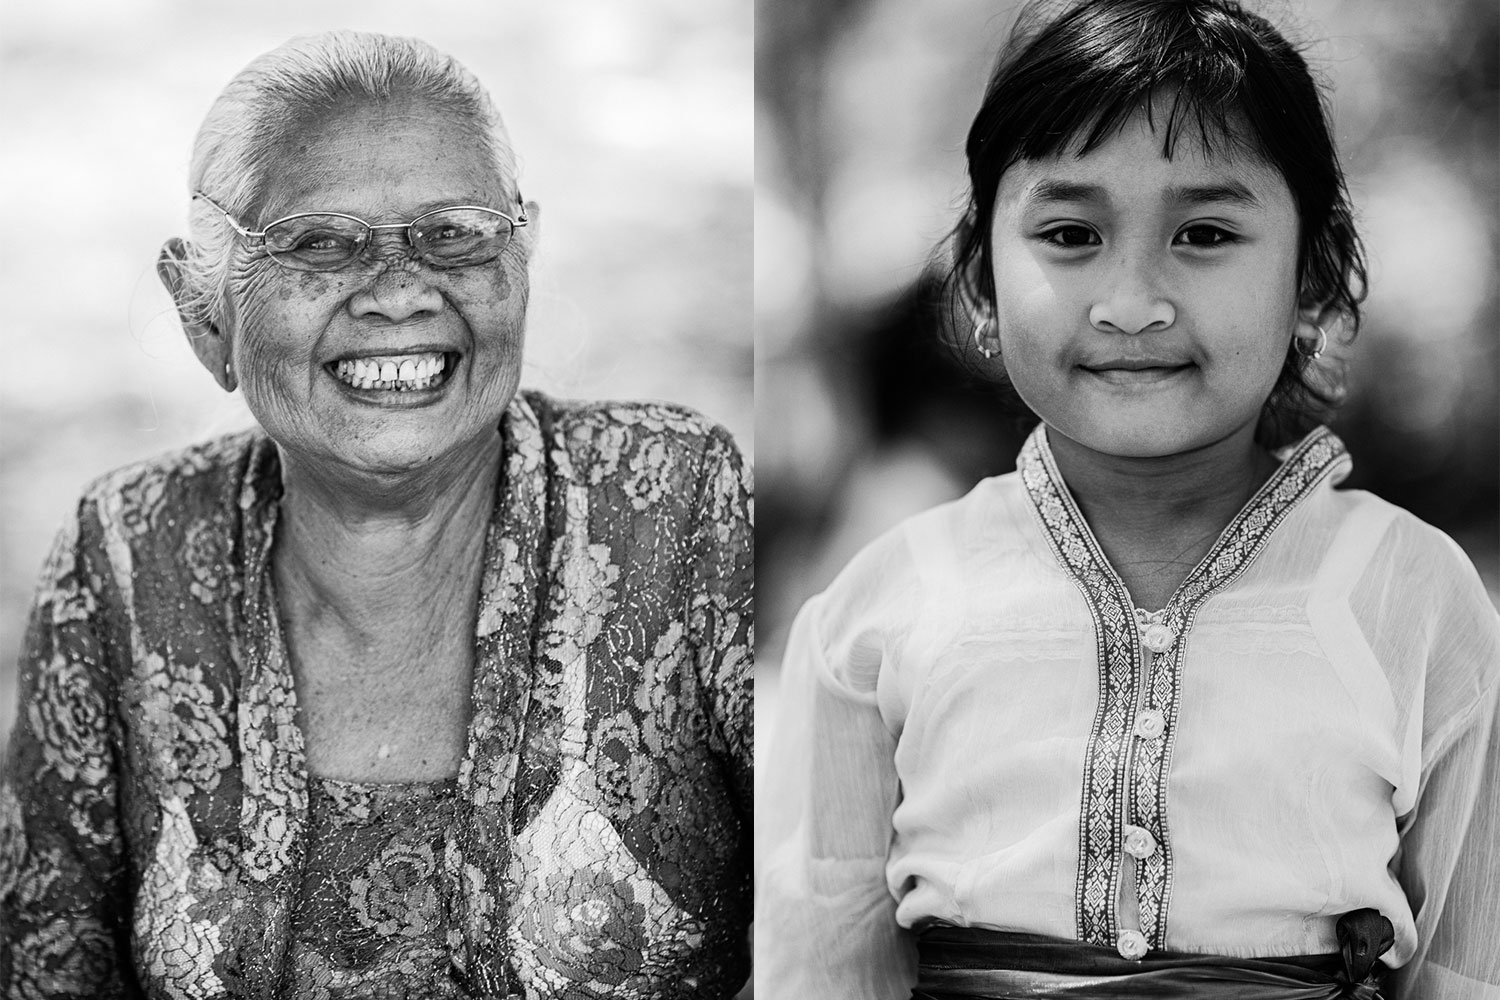 Elderly woman dressed in traditional clothing smiling, and a young Balinese girl posing for her portrait